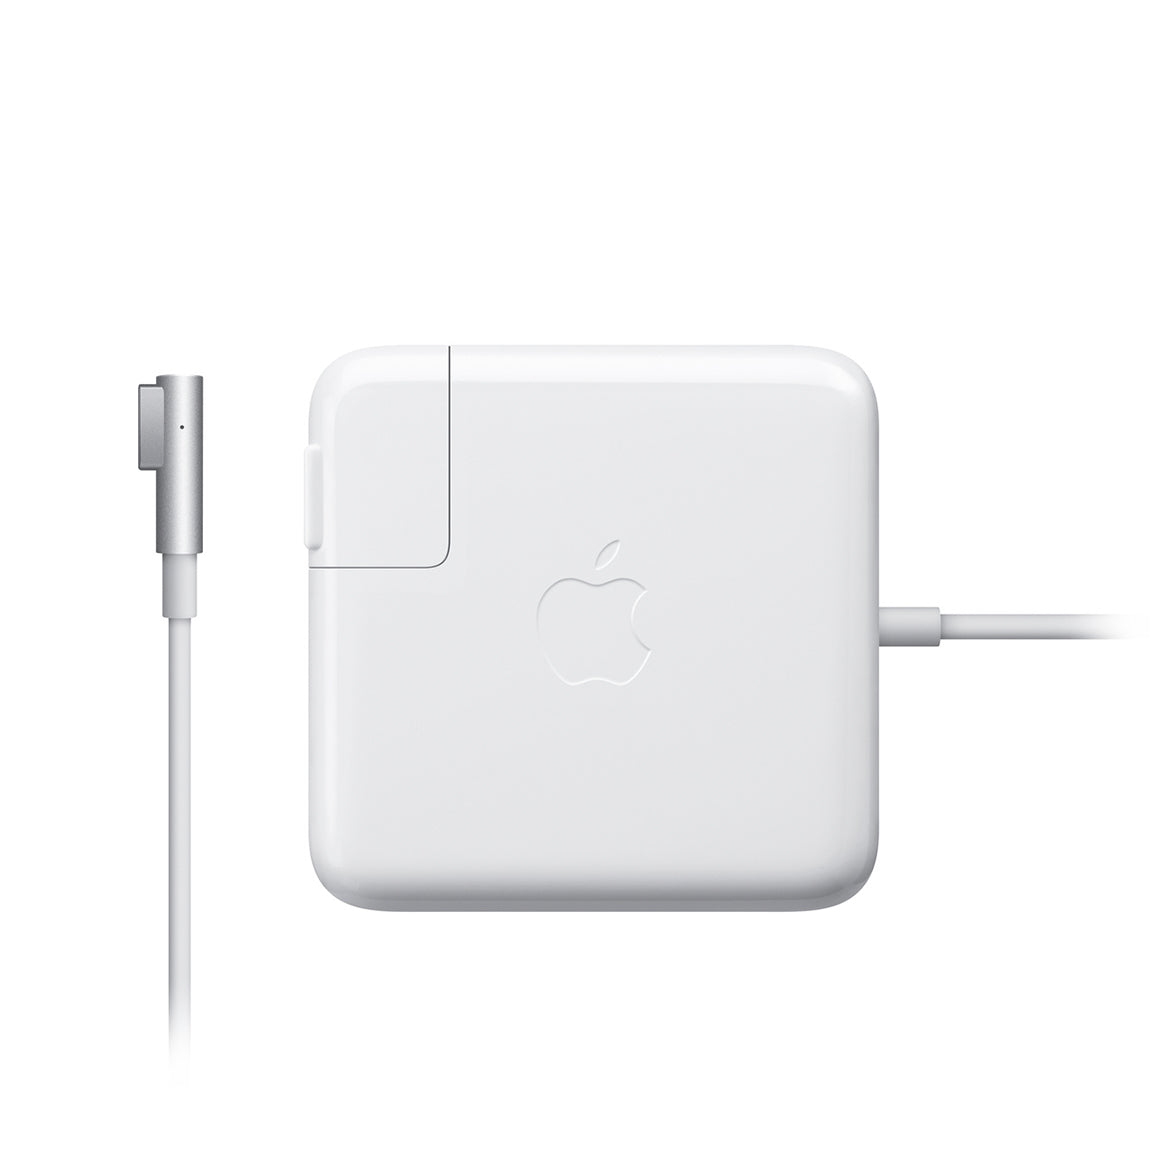 60W MagSafe Power Adapter for previous generation 13.3-inch MacBook and 13-inch MacBook Pro